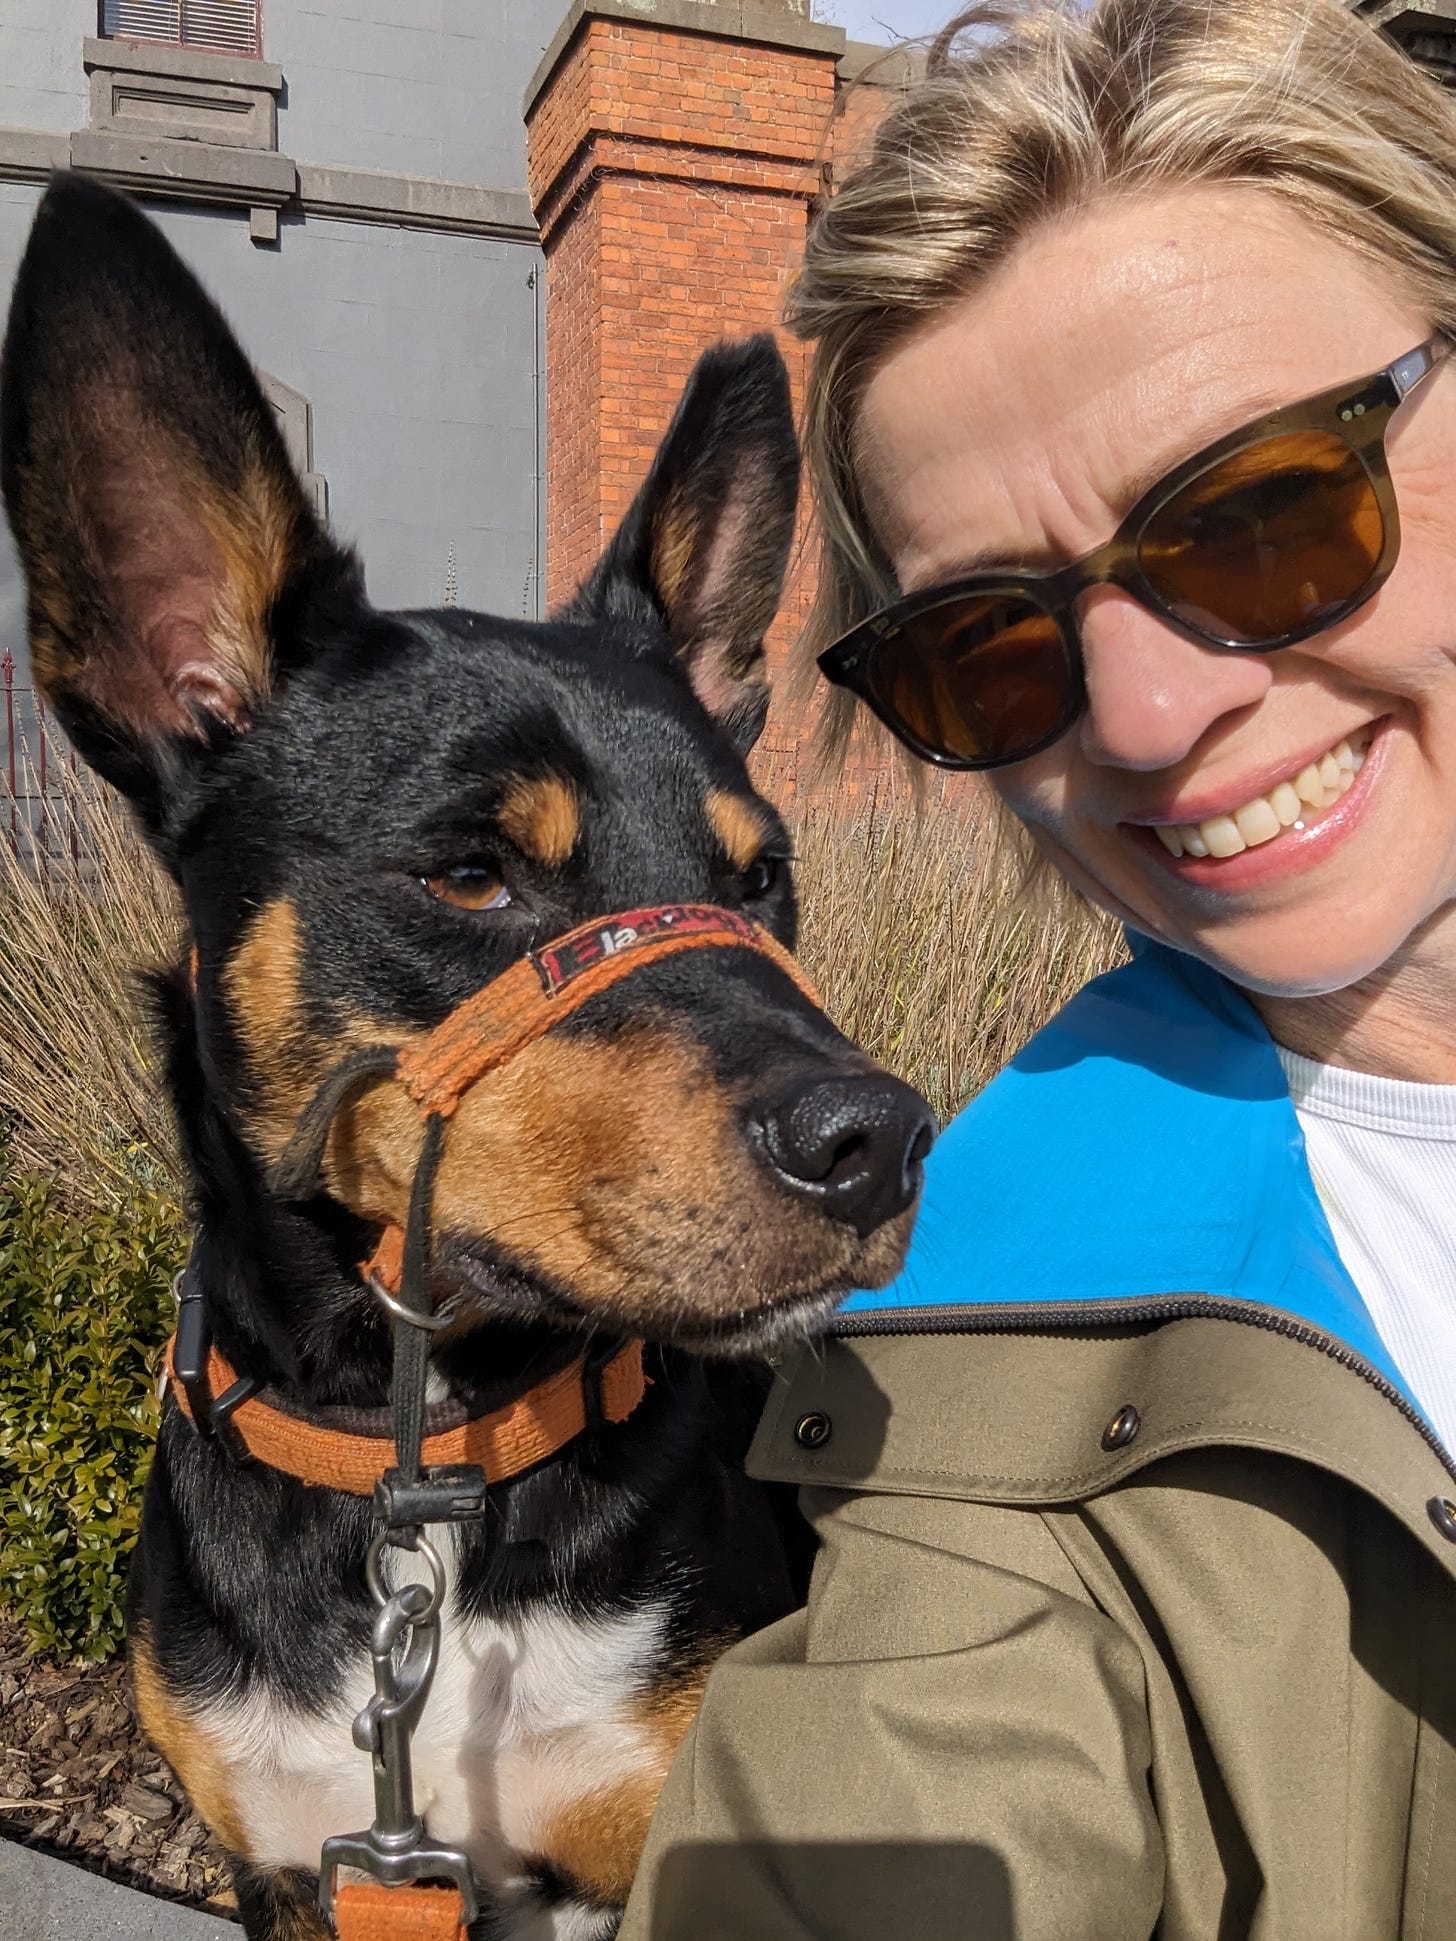 Smiling woman in sunglasses and a blue and olive coat sitting next to a black and tan Australian Kelpie dog. The woman is smiling at the camera. The dog is looking off into the distance.